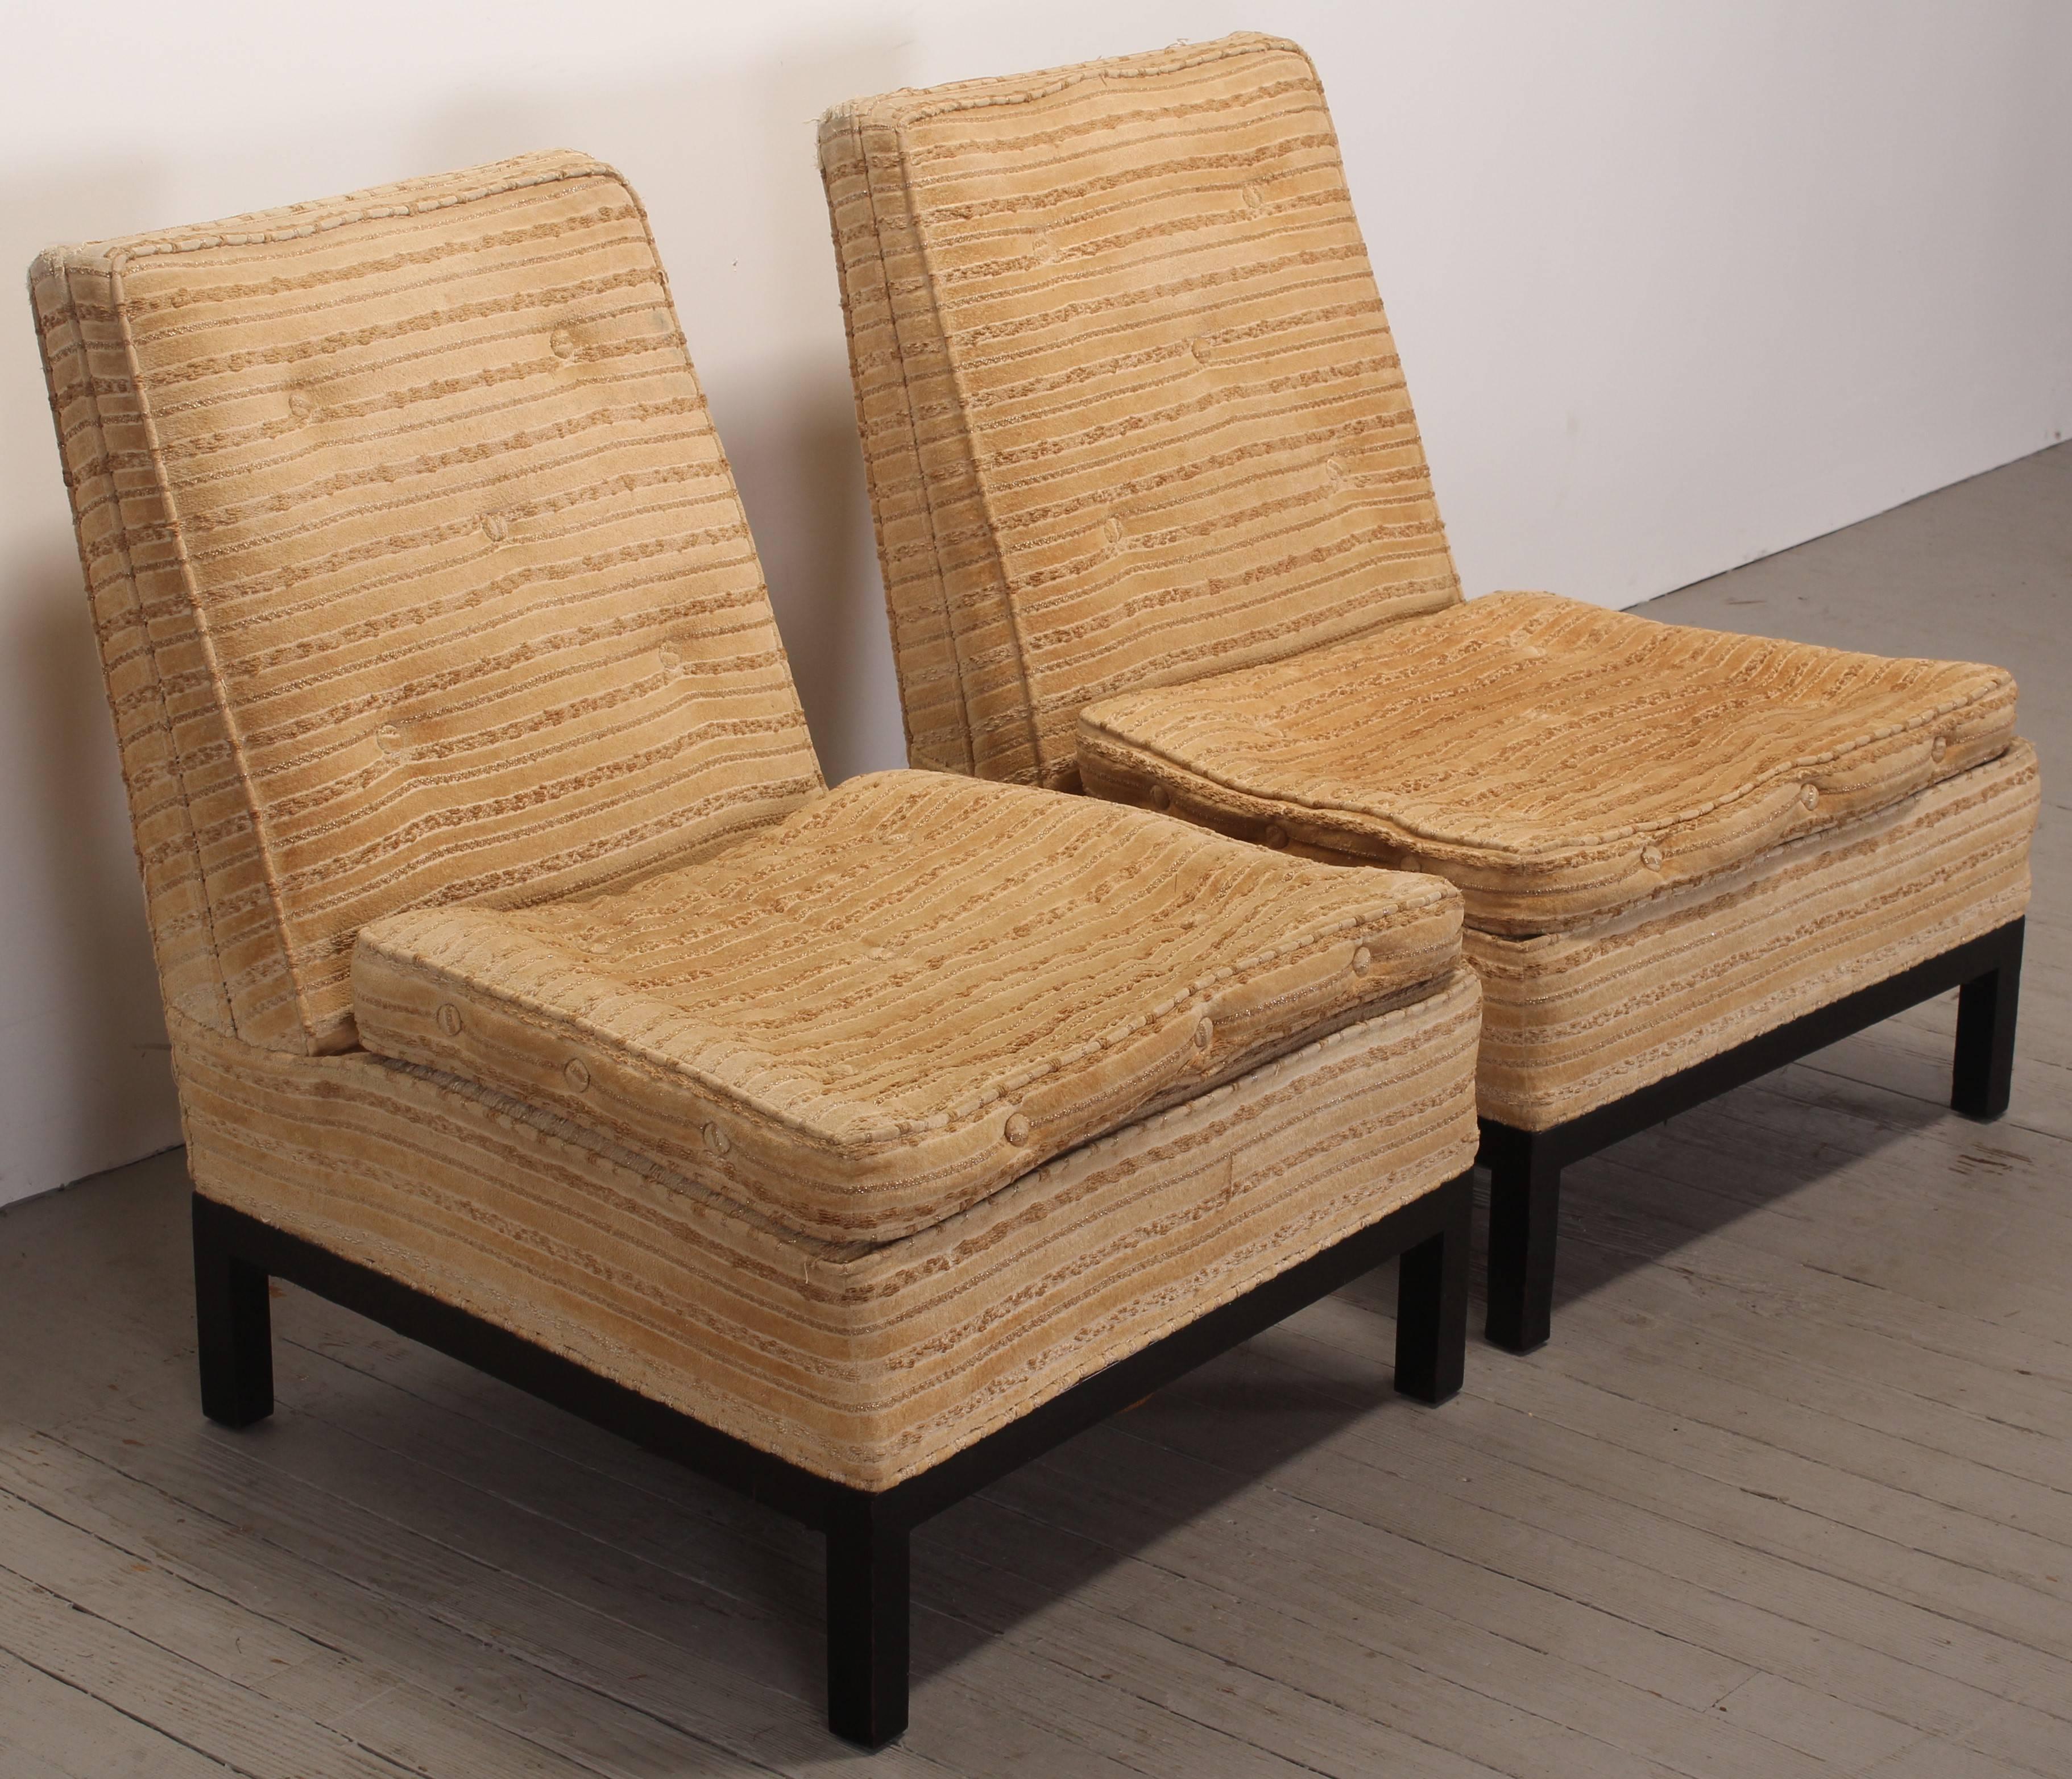 Rare pair of slipper chairs designed by Robsjohn-Gibbings for Widdicomb Furniture Co. Original upholstery which obviously needs to be replace, frames are solid, legs show some are as represented in images.